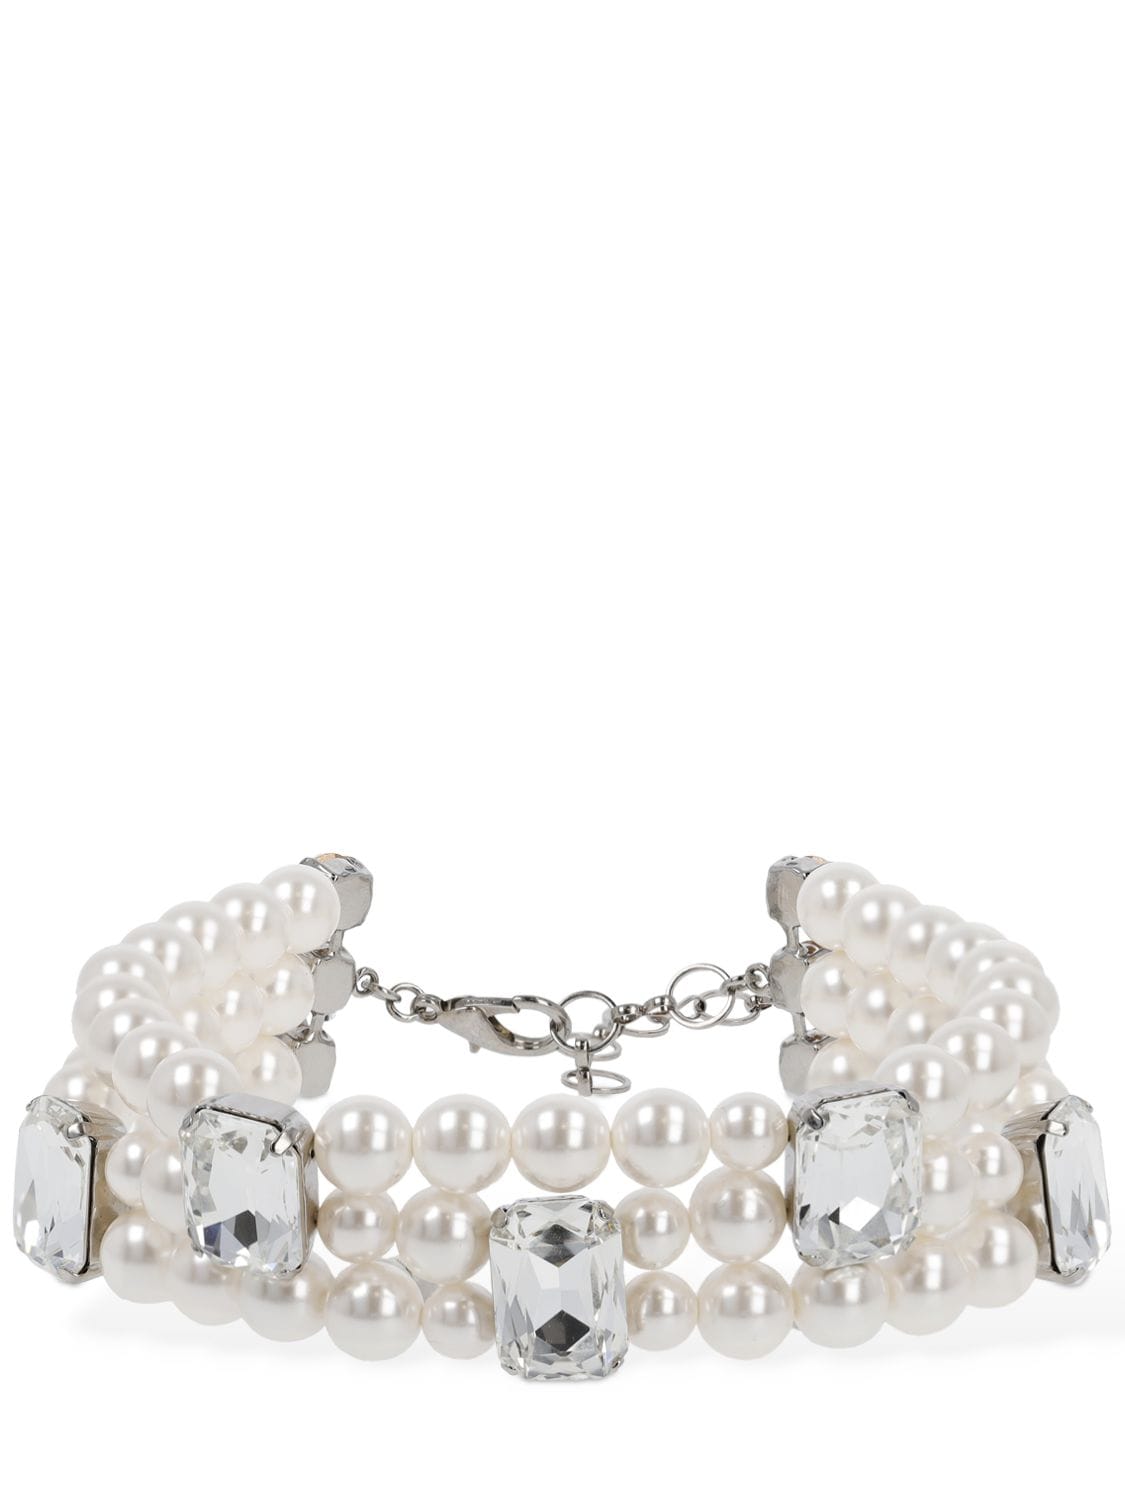 Alessandra Rich Faux Pearl Choker W/ Crystal Elements In White,crystal